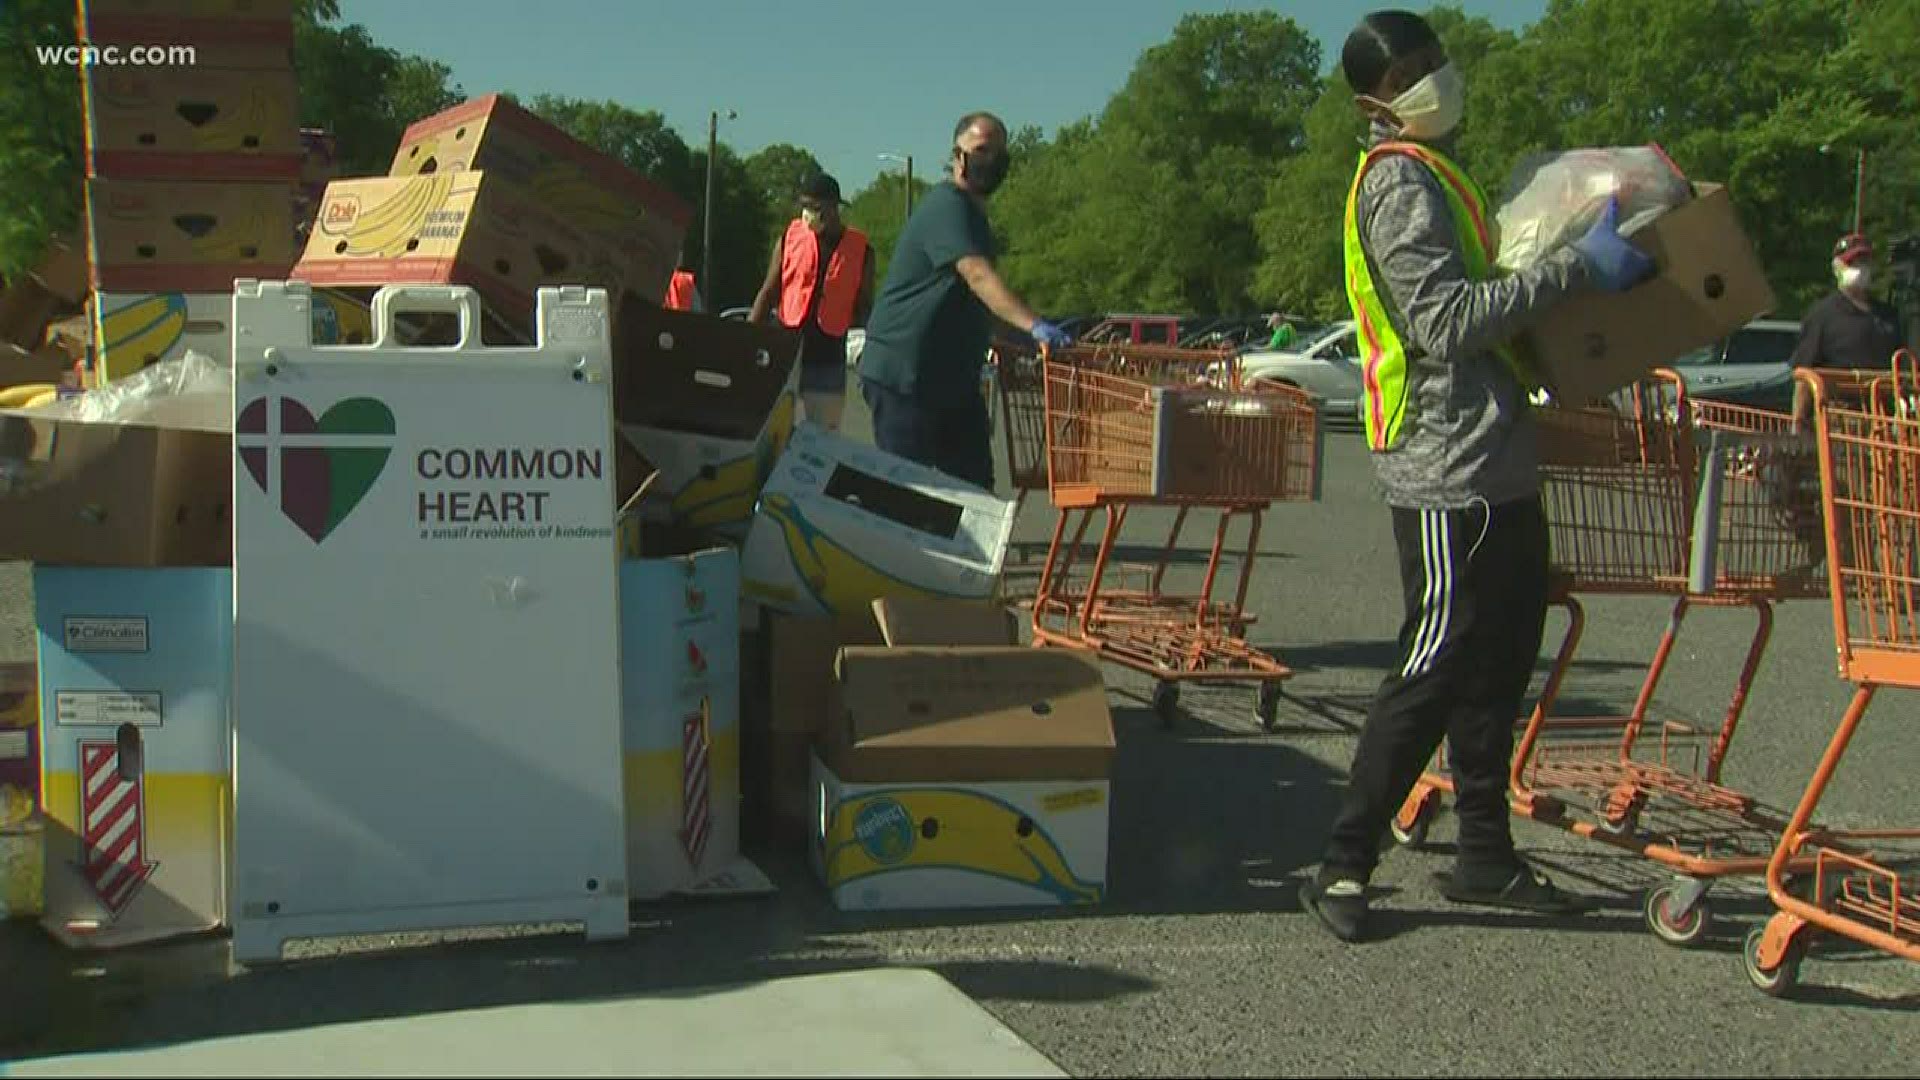 A drive-through food pantry is offering to feed everyone and anyone who stops by needing resources for their families.